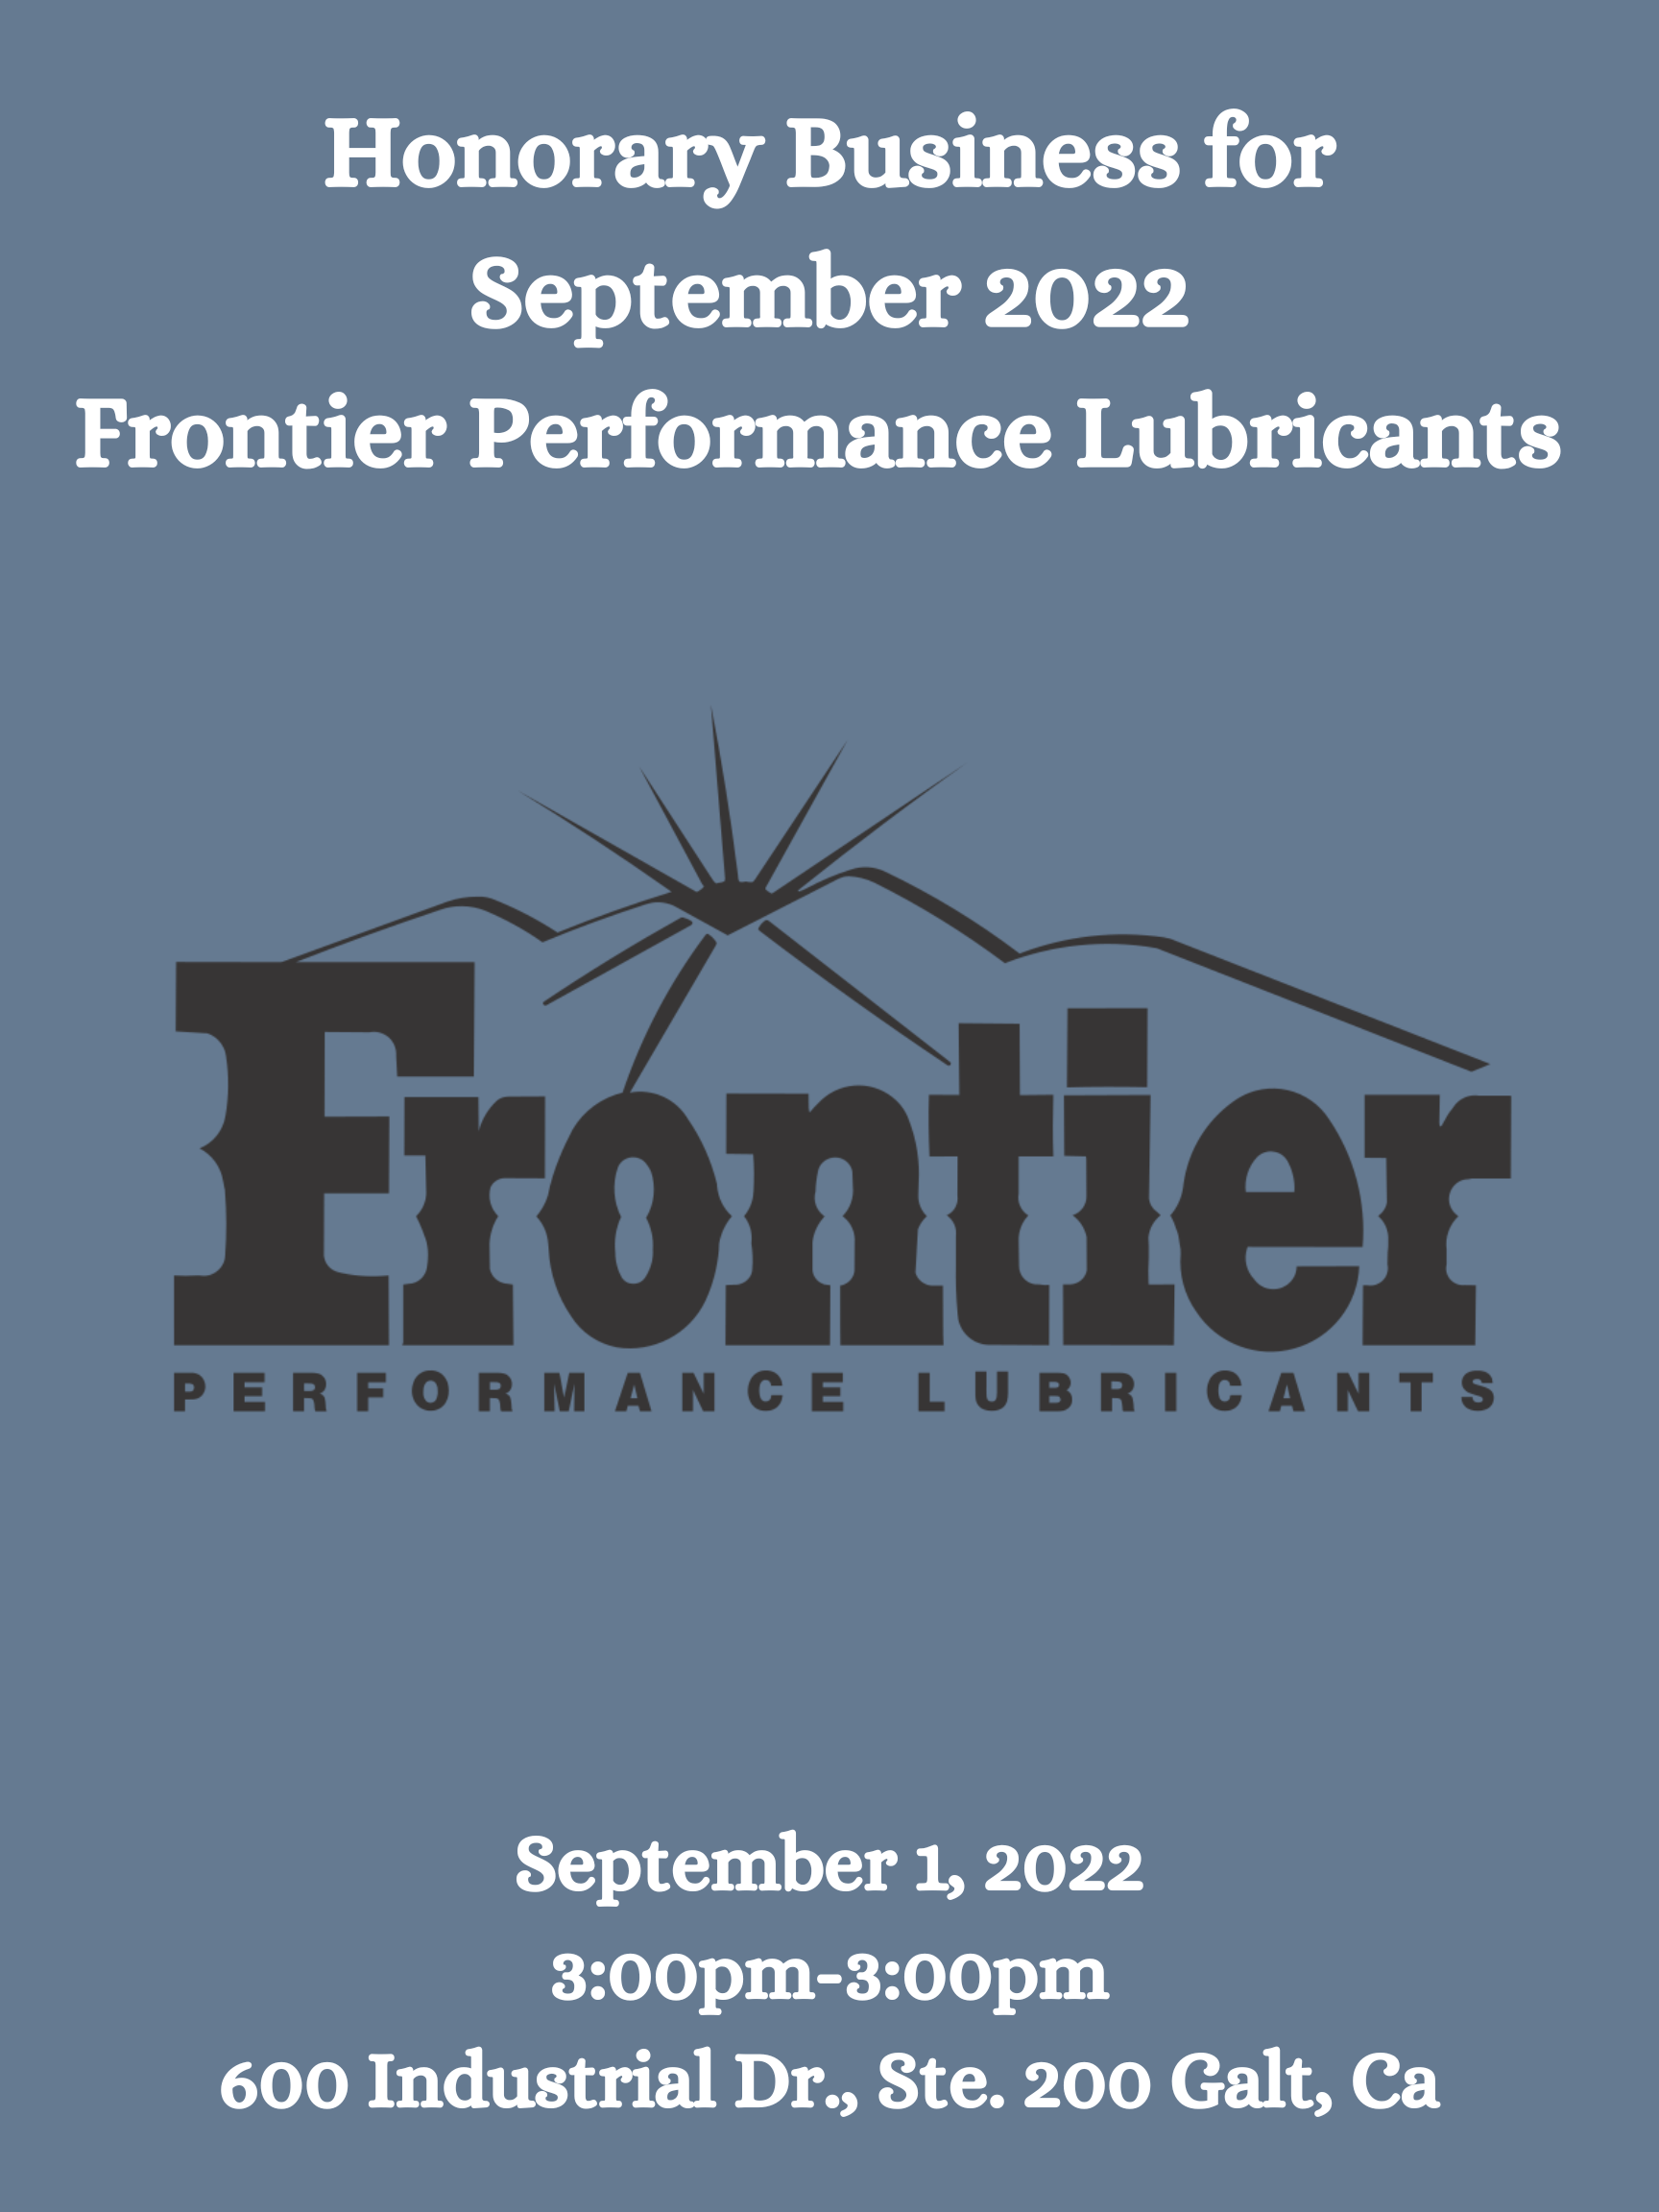 Honorary Business for September 2022: Frontier Performance Lubricants. Celebration: 9/1 at 3pm, 600 Industrial Dr., Ste. 200,